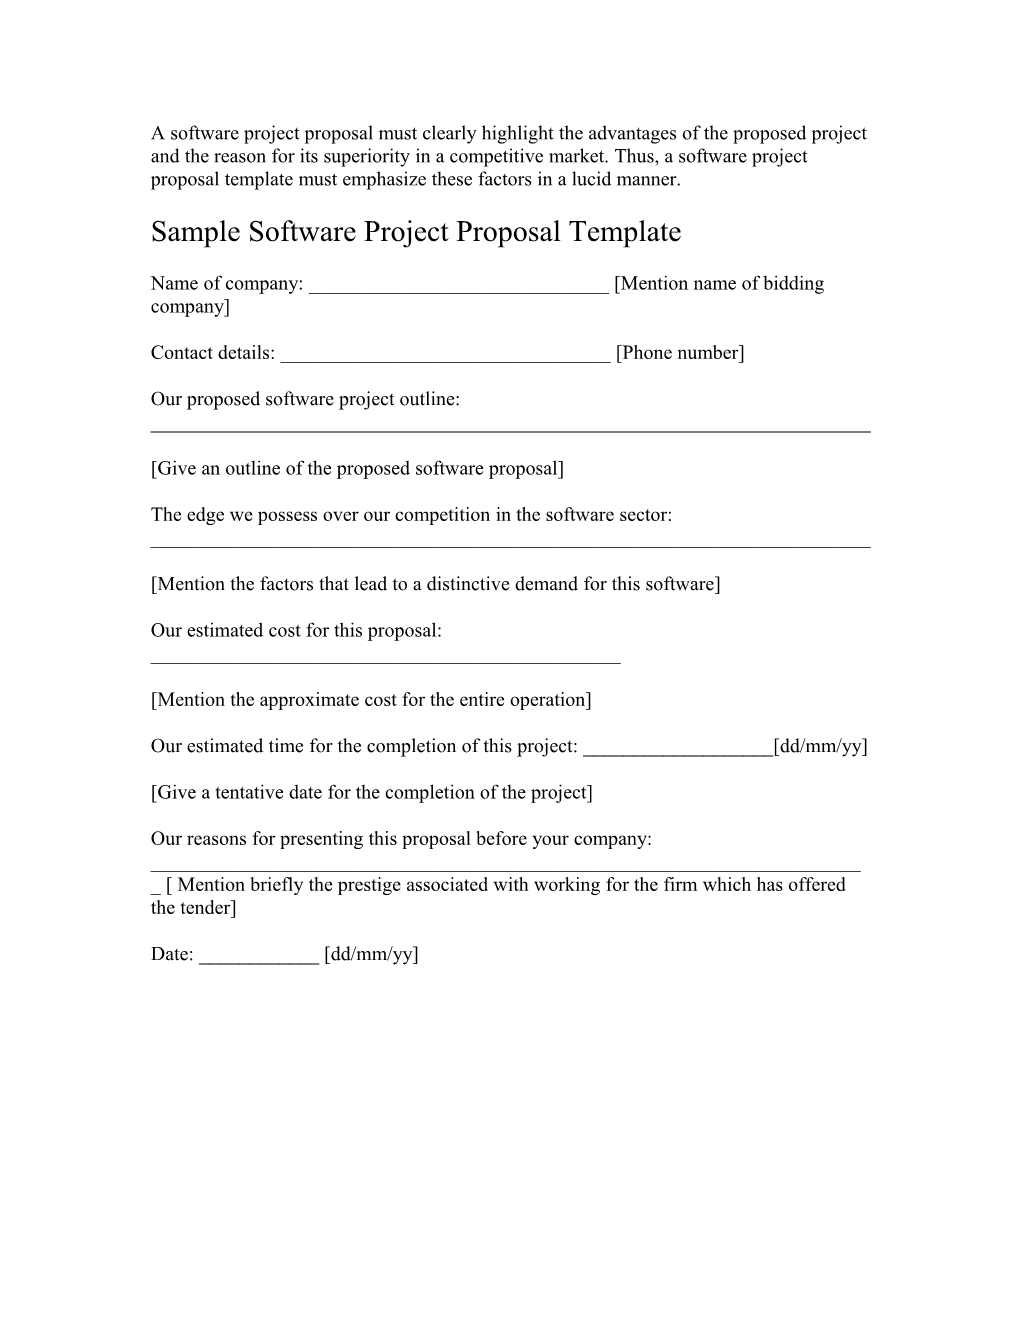 Sample Software Project Proposal Template